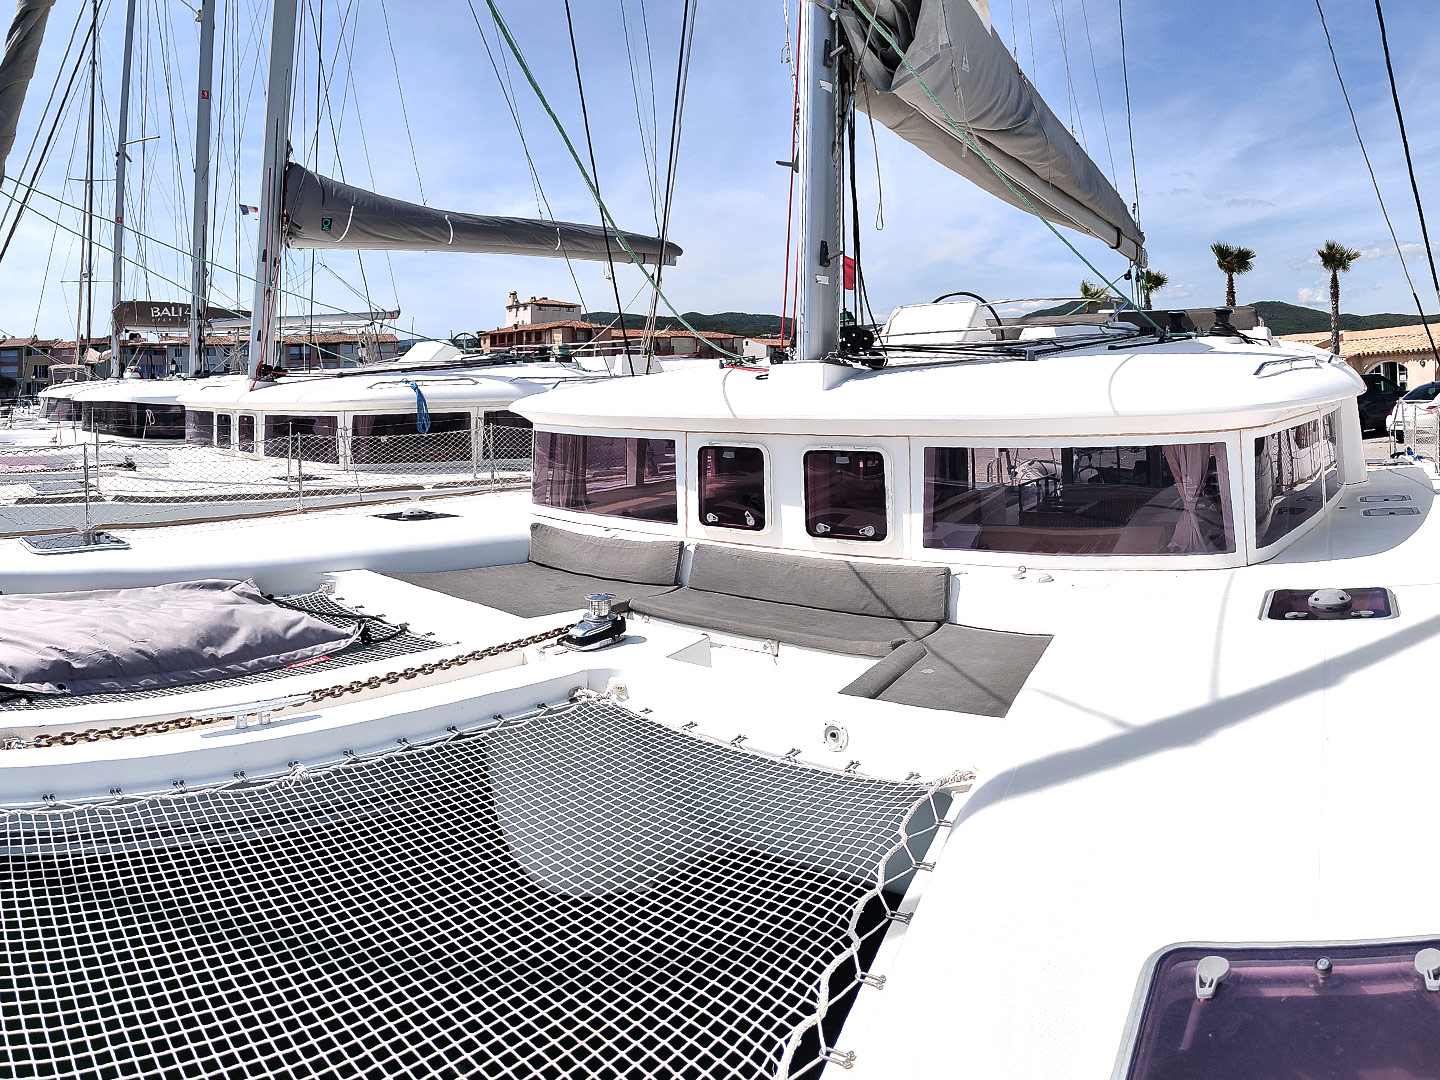 Lagoon 450 Fly - Catamaran Charter France & Boat hire in France French Riviera Grimaud Port Grimaud 2